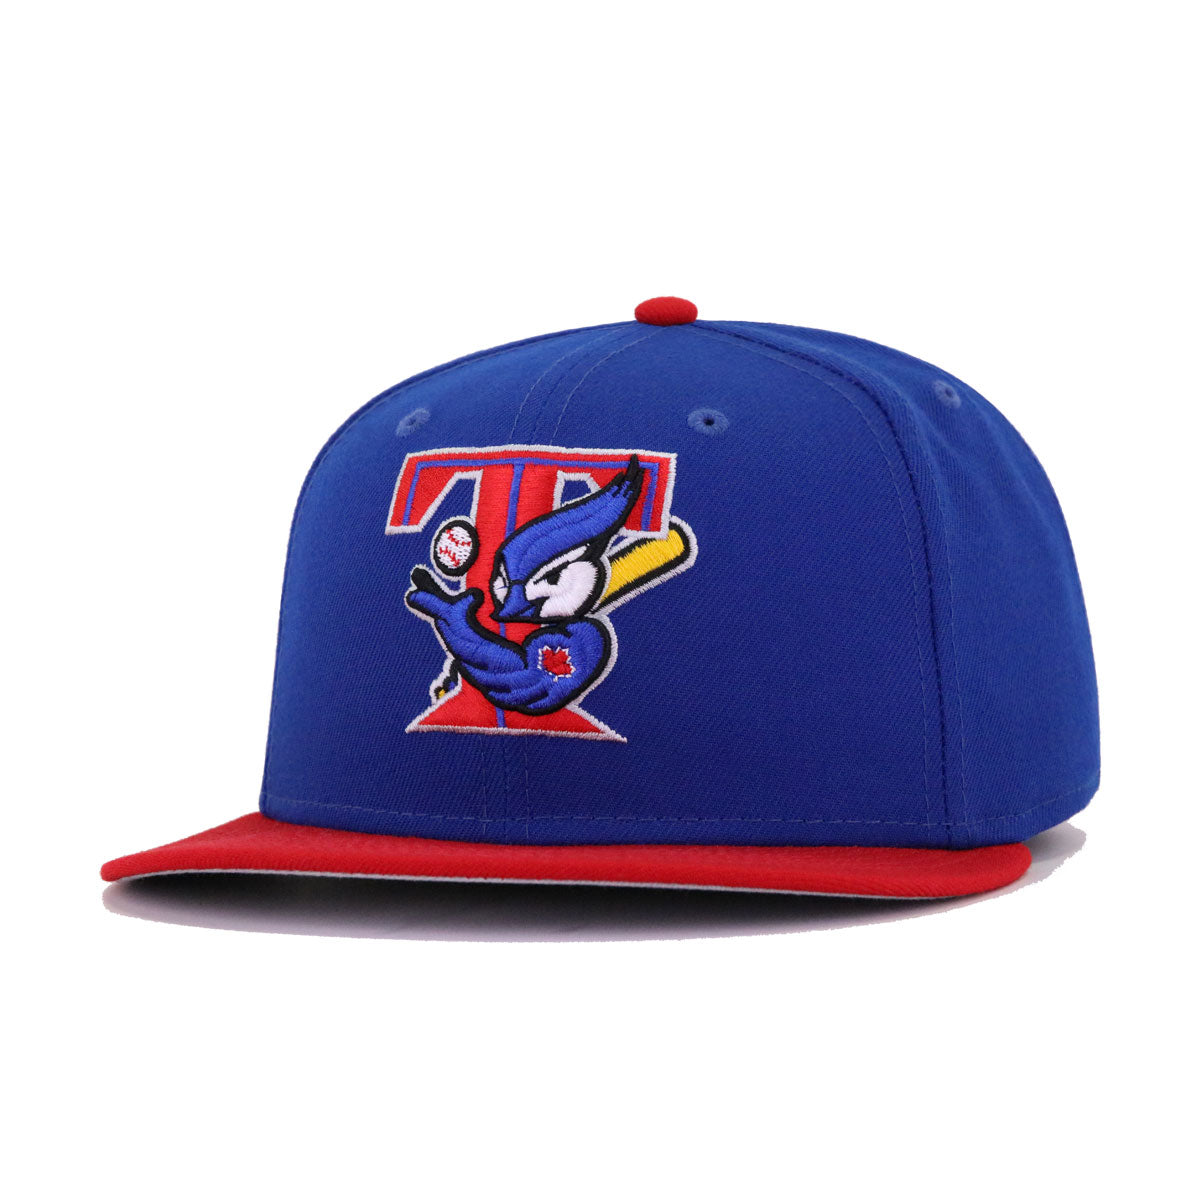 Toronto Baseball Hat Light Royal Blue Scarlet 2003 Cooperstown AC New Era 59FIFTY Fitted